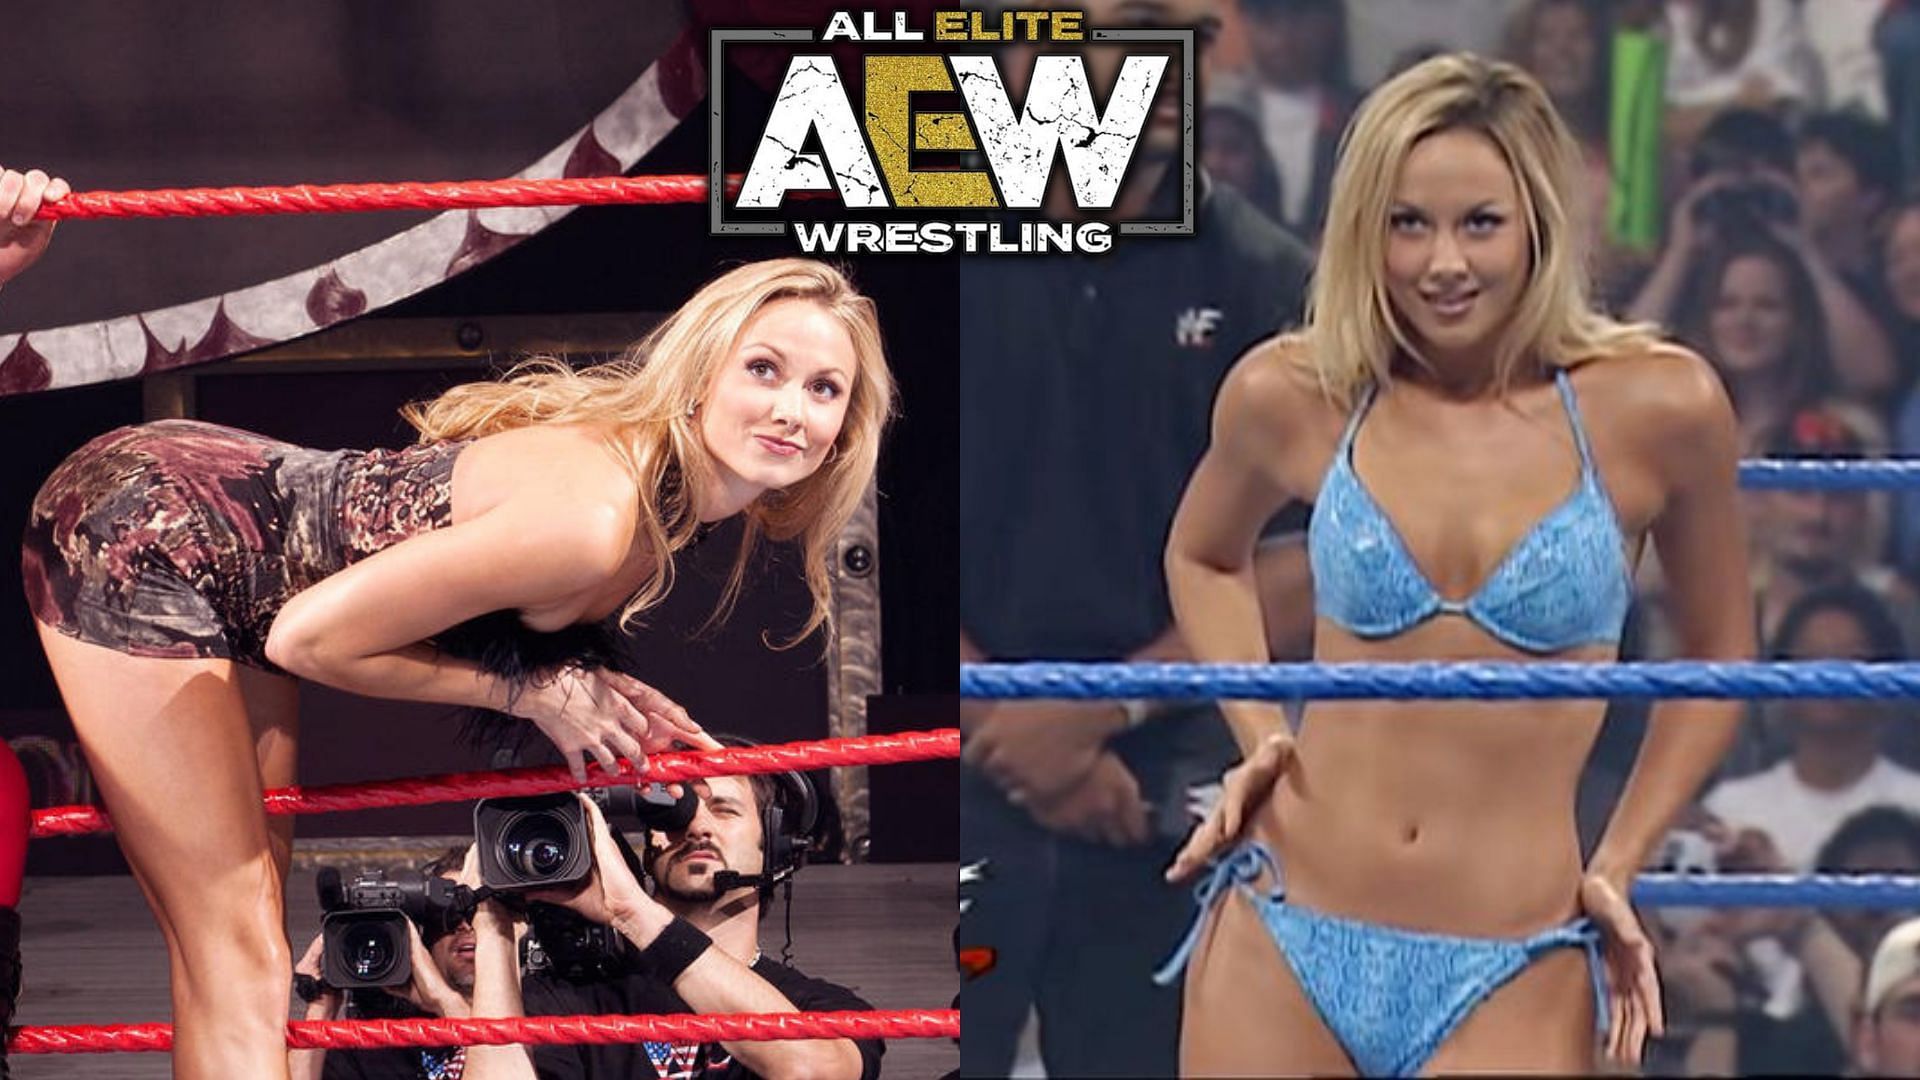 Stacy Keibler was recently compared to an AEW star